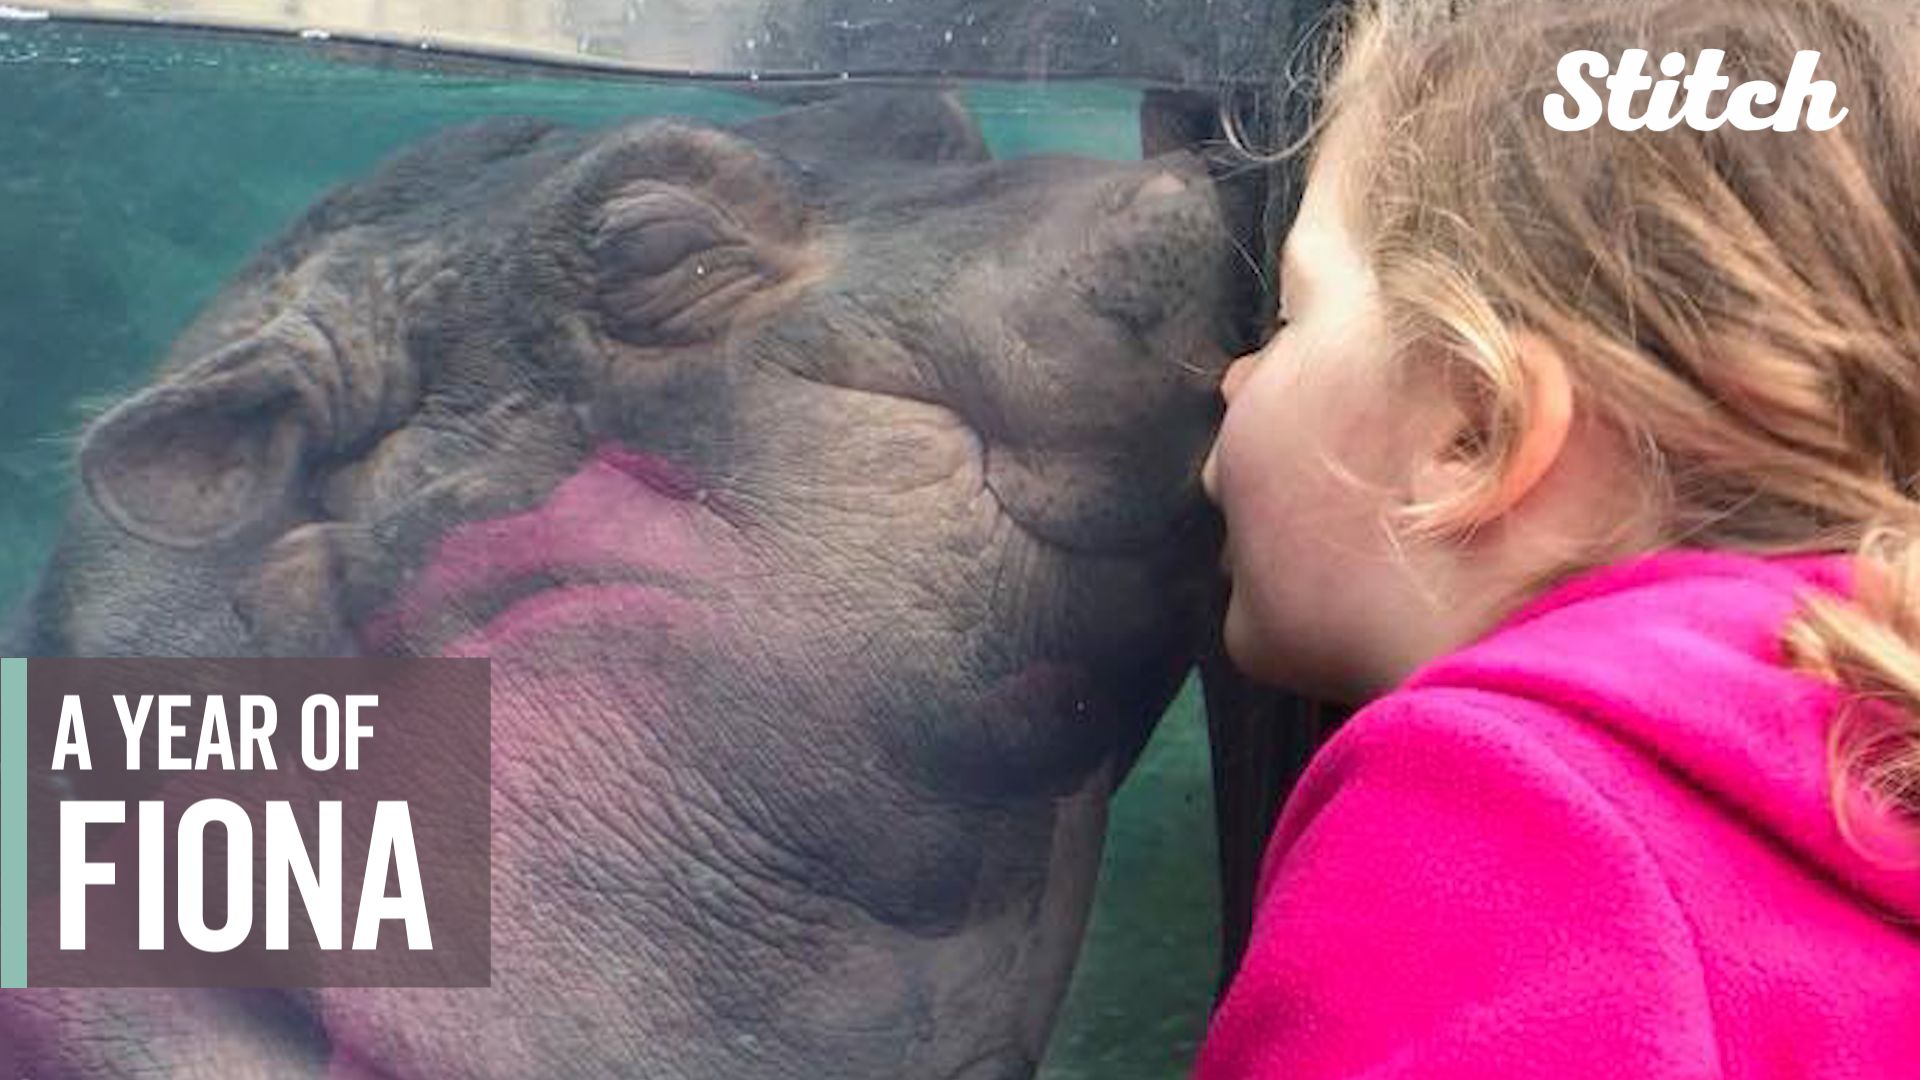 15 Times Fiona The Hippo Stole Our Hearts Over The Past Year